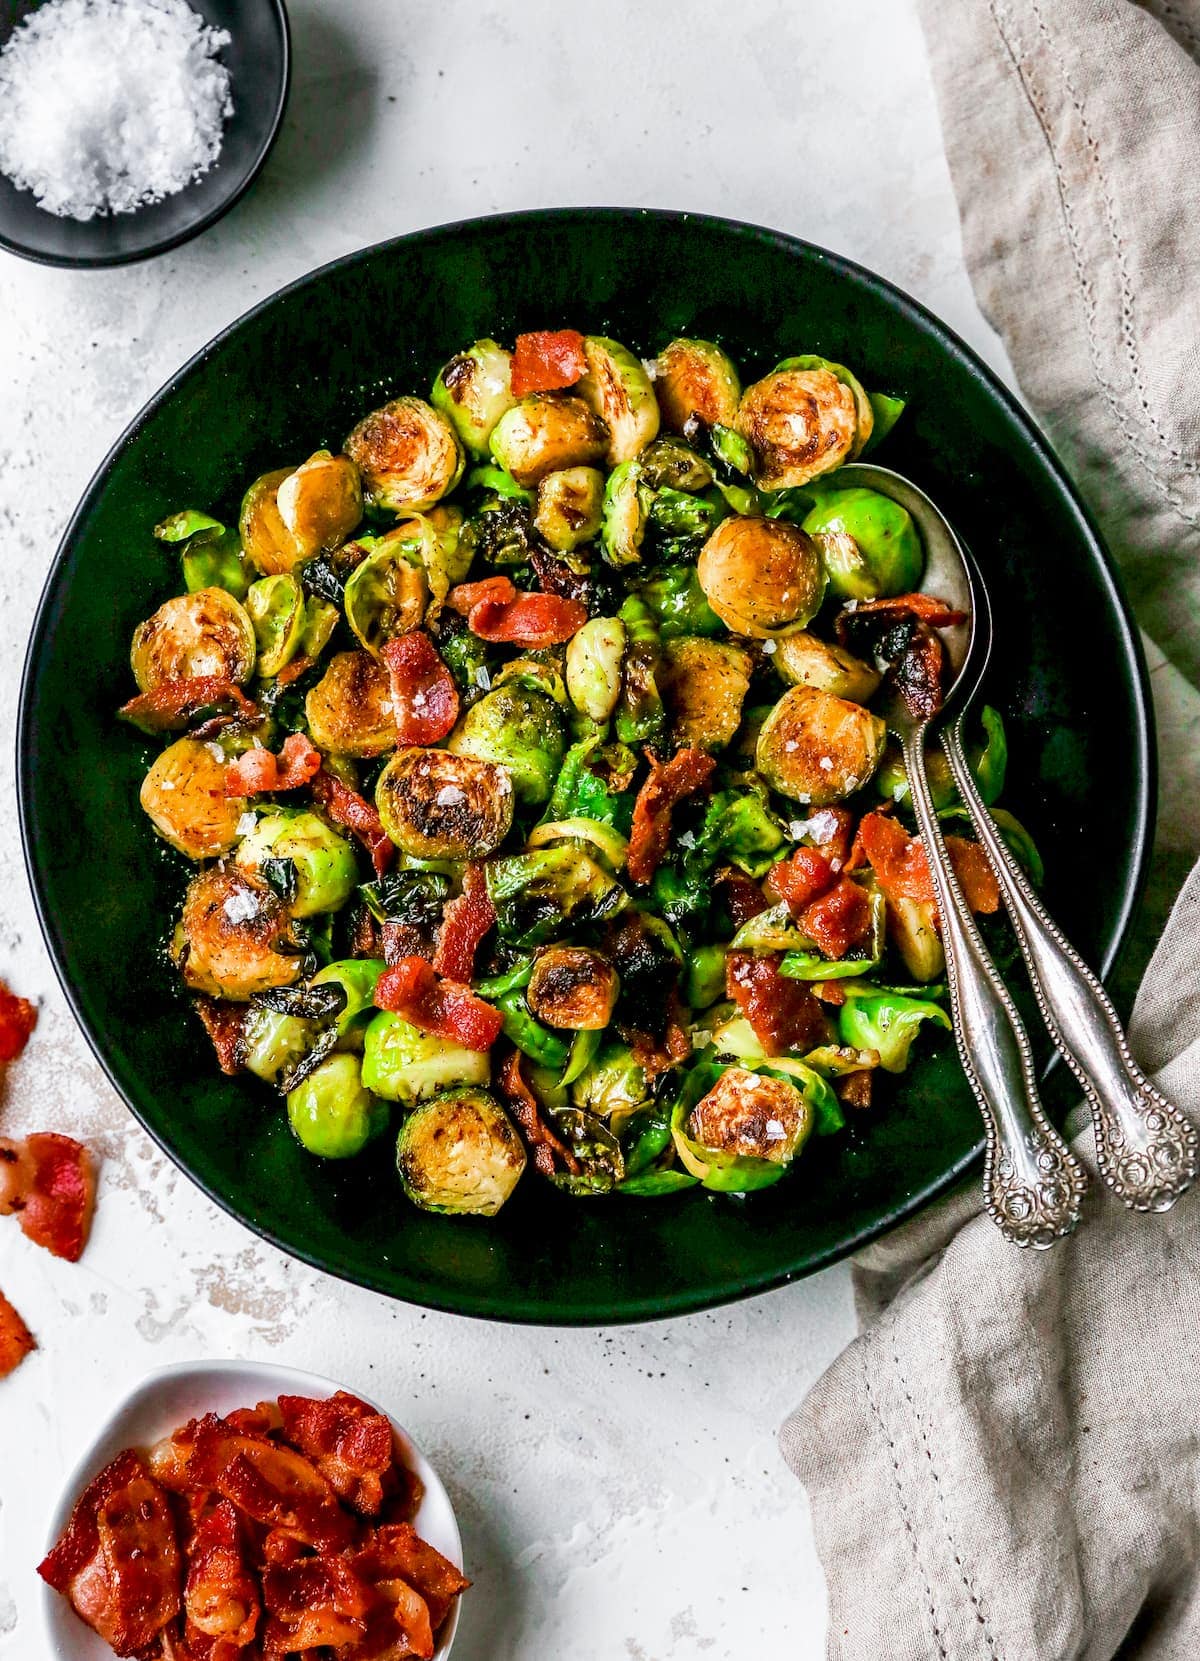 Sprout brussel How to